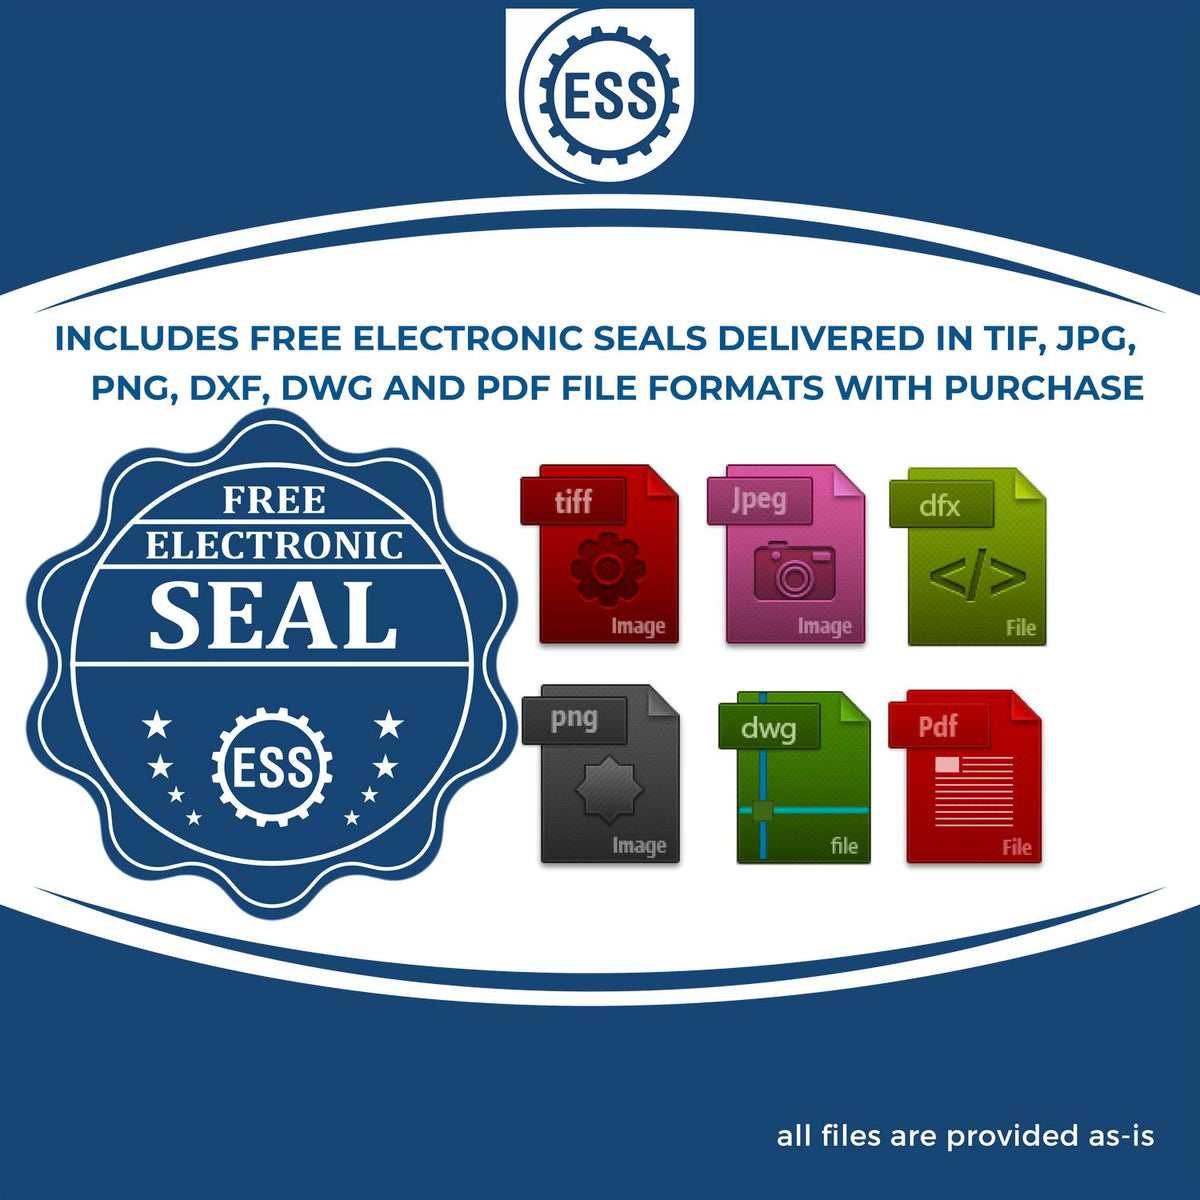 An infographic for the free electronic seal for the MaxLight Premium Pre-Inked Wyoming Rectangular Notarial Stamp illustrating the different file type icons such as DXF, DWG, TIF, JPG and PNG.